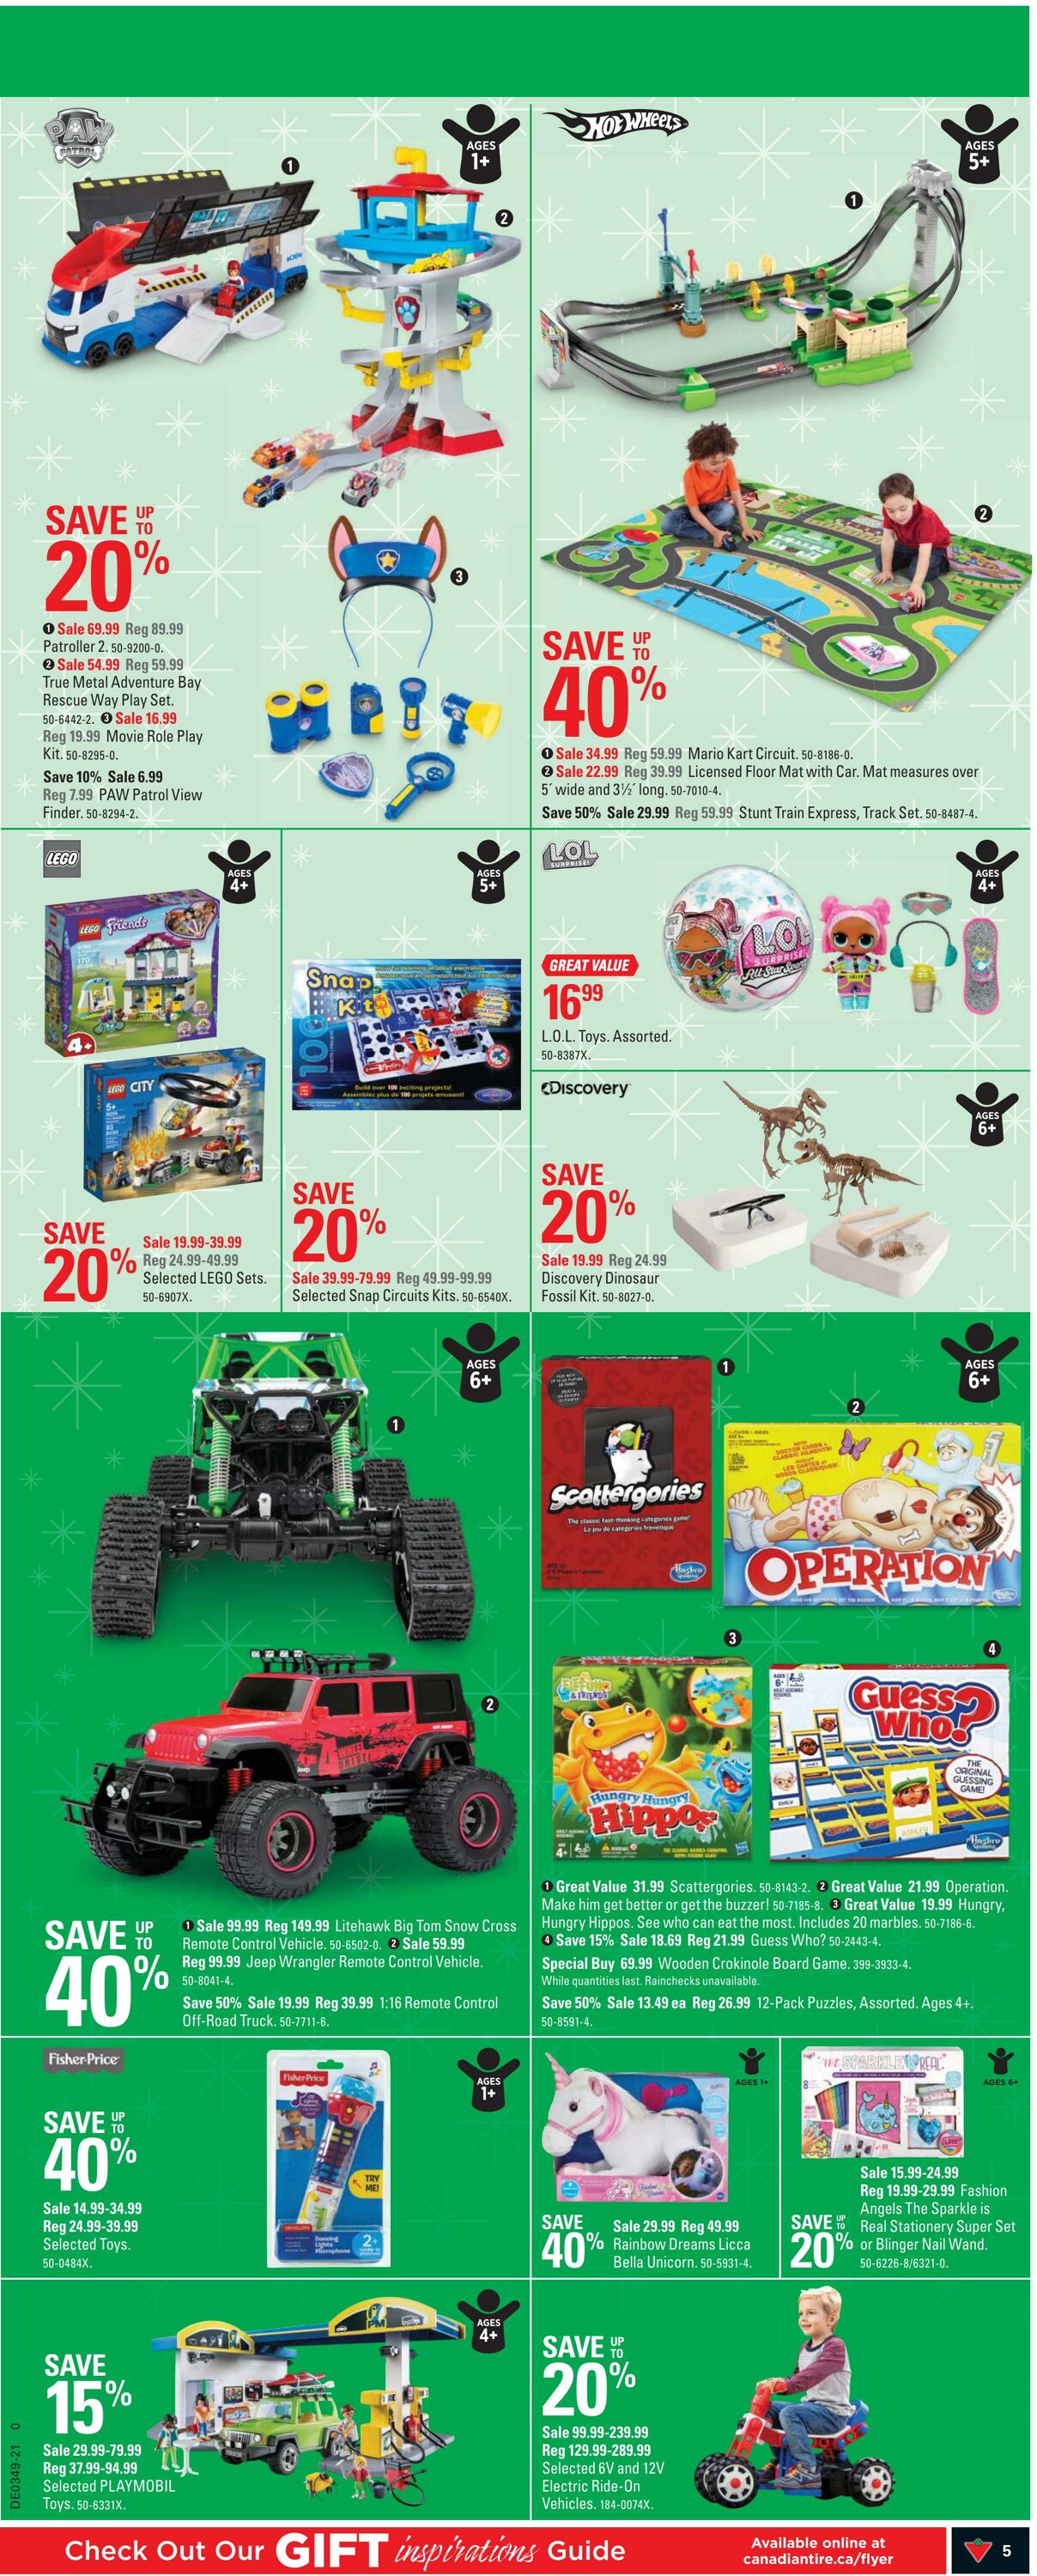 Flyer Canadian Tire 02.12.2021 - 08.12.2021